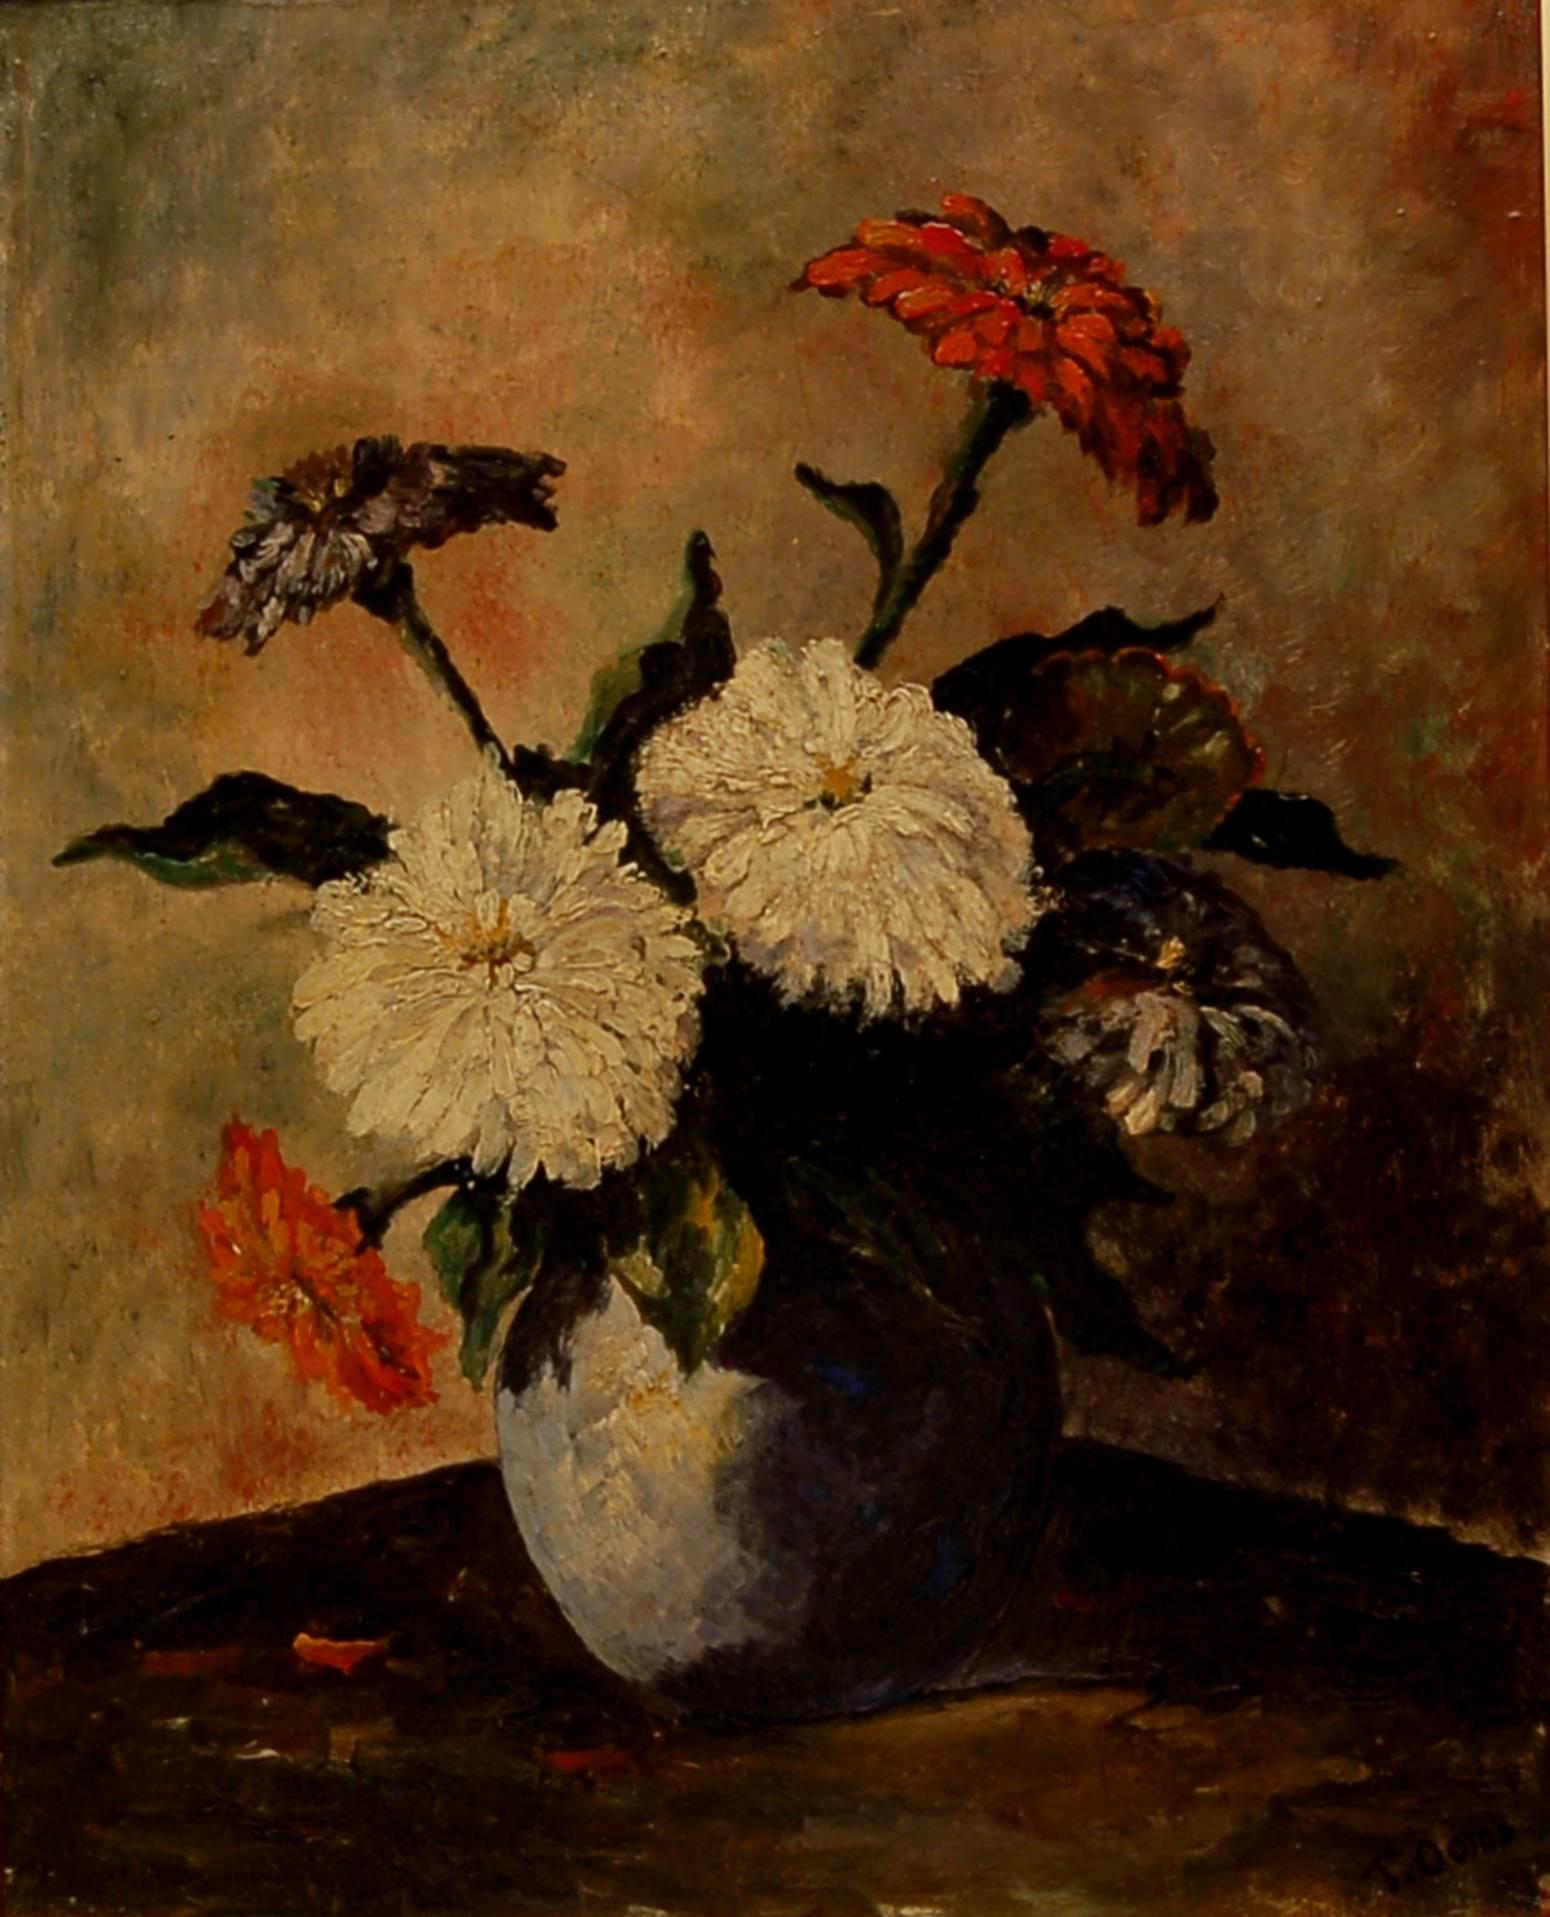 Still Life Flowers - Painting by Teunis Ooms